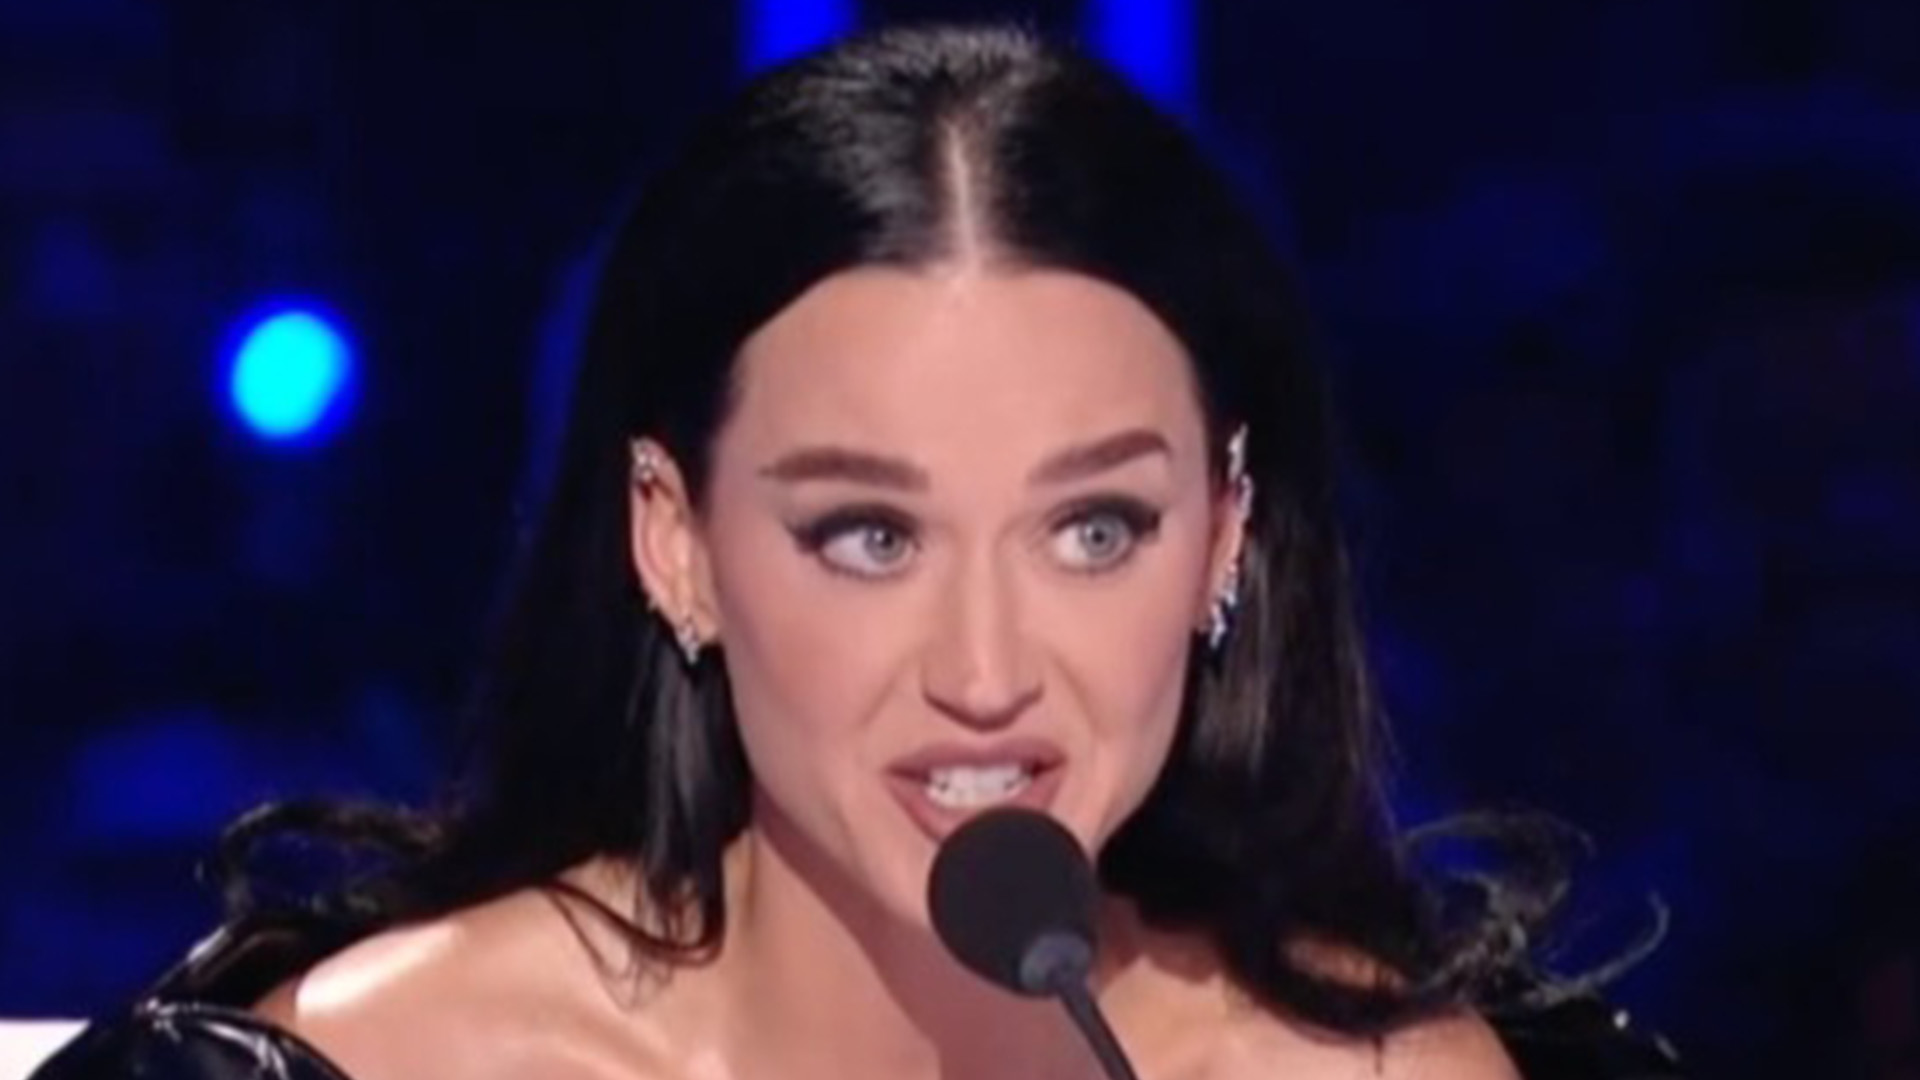 Katy Perry critics call out star for ‘raunchy’ dress during American Idol episode as they rage ‘it’s a family show!’ [Video]